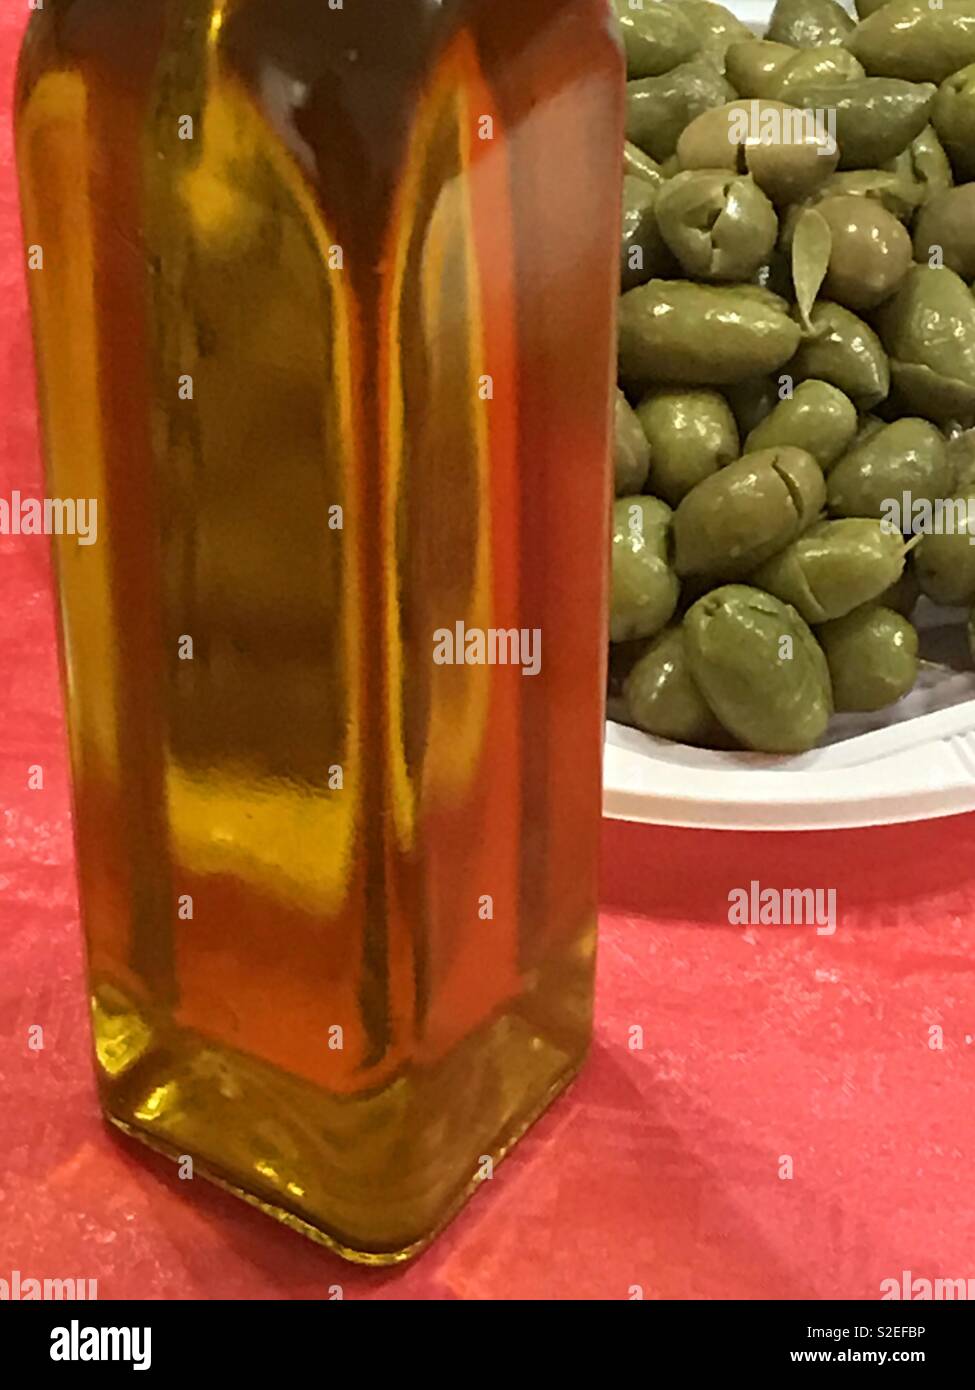 Olive oil and green olives Stock Photo - Alamy